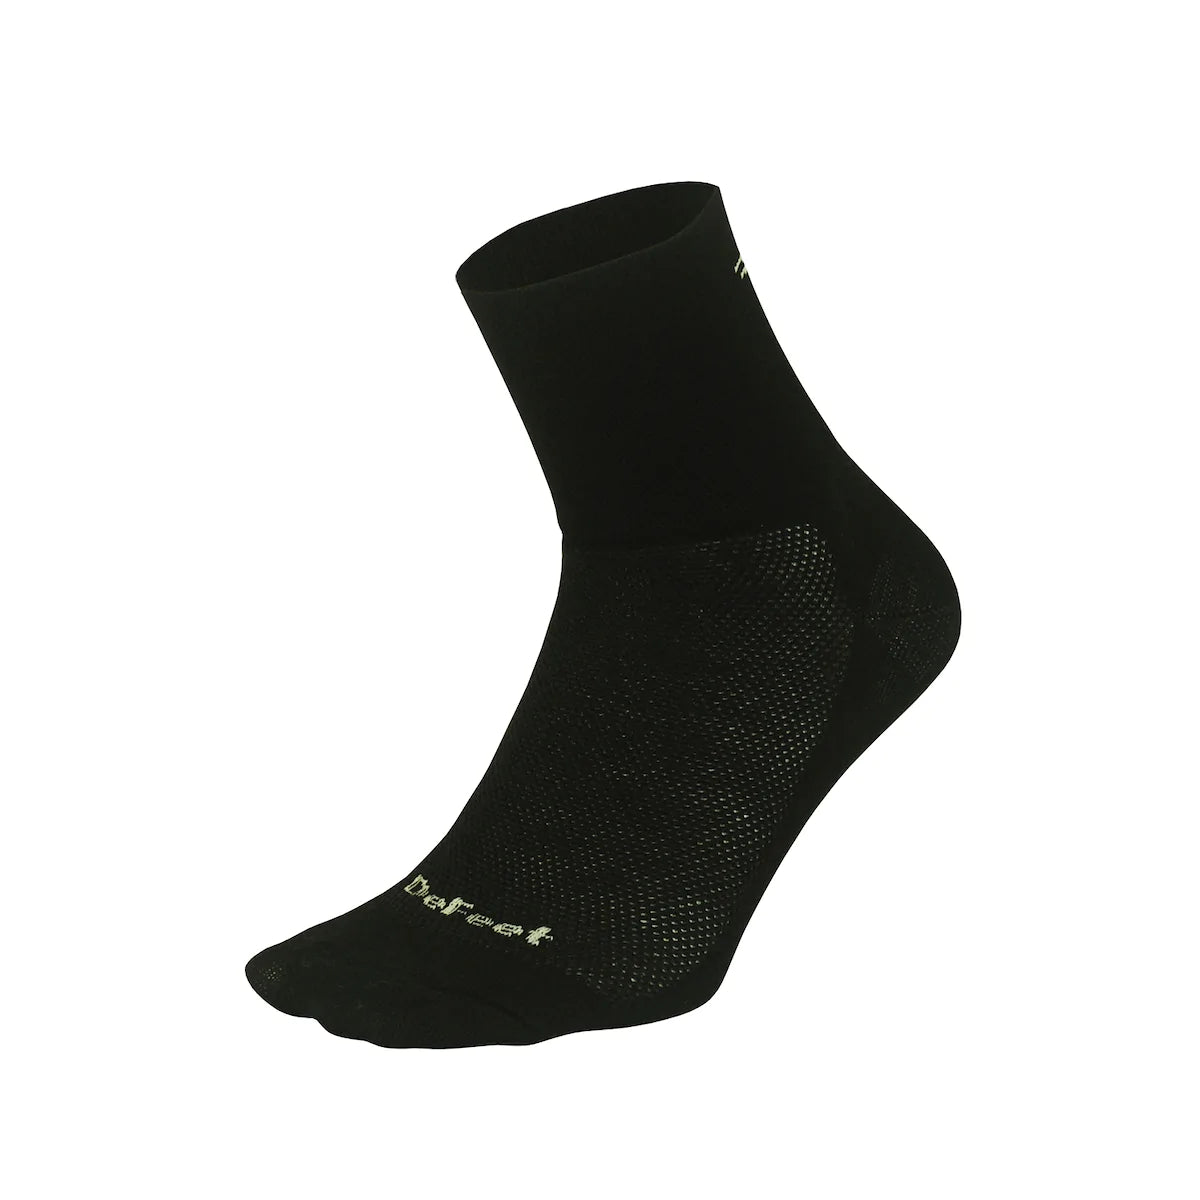 Aireator 3" cuff cycling sock in black with small white d-logo on back of cuff